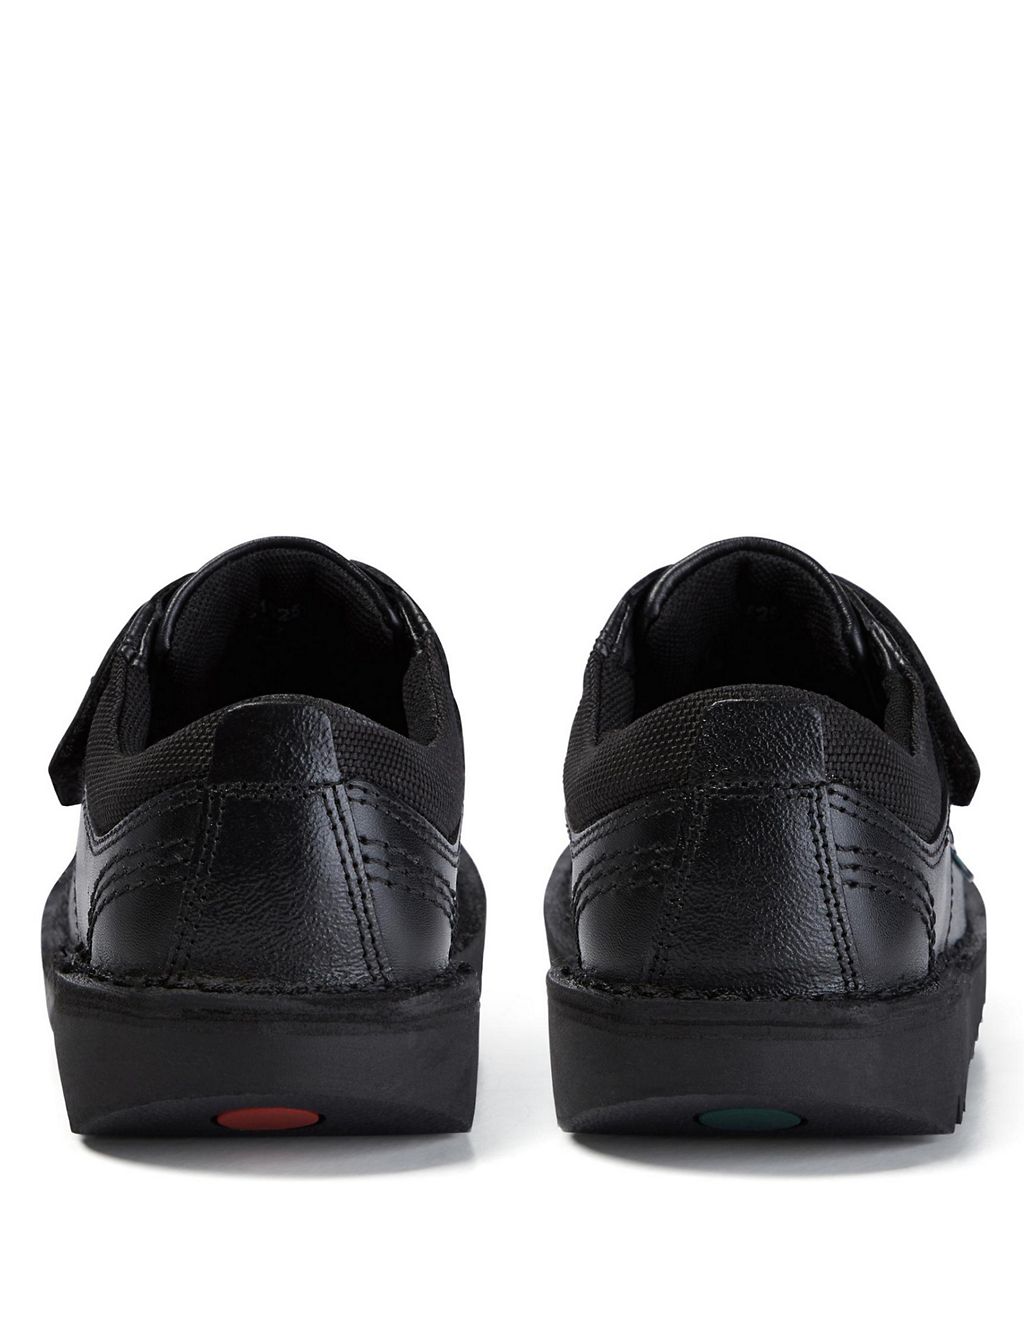 Kids' Leather Riptape School Shoes 2 of 5